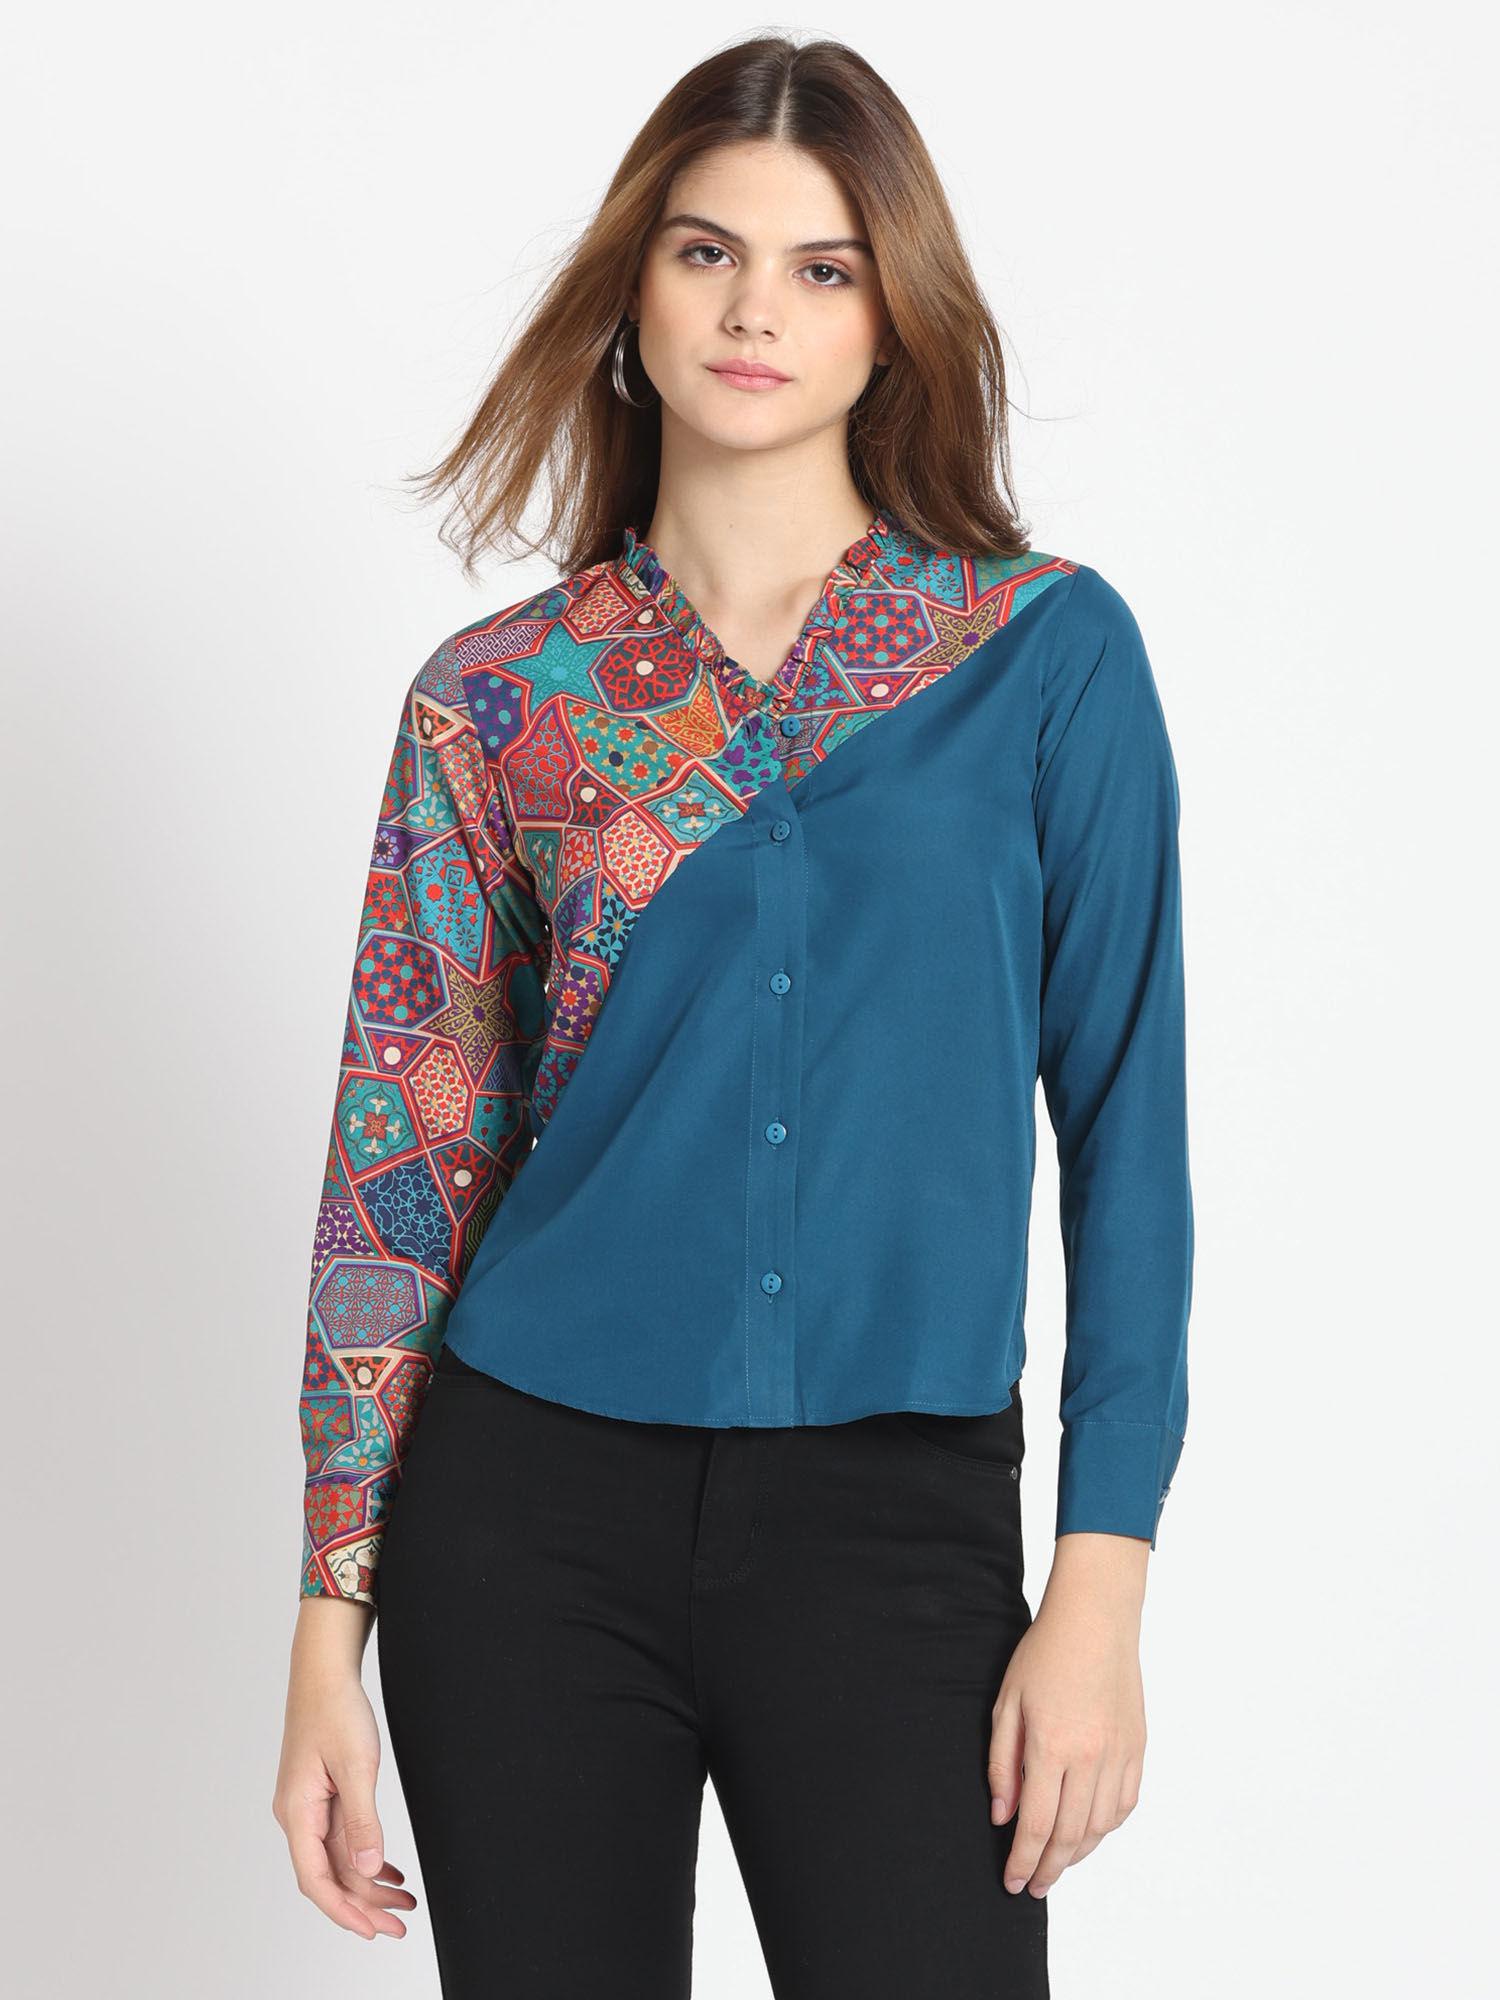 teal-printed-long-sleeves-casual-shirts-for-women